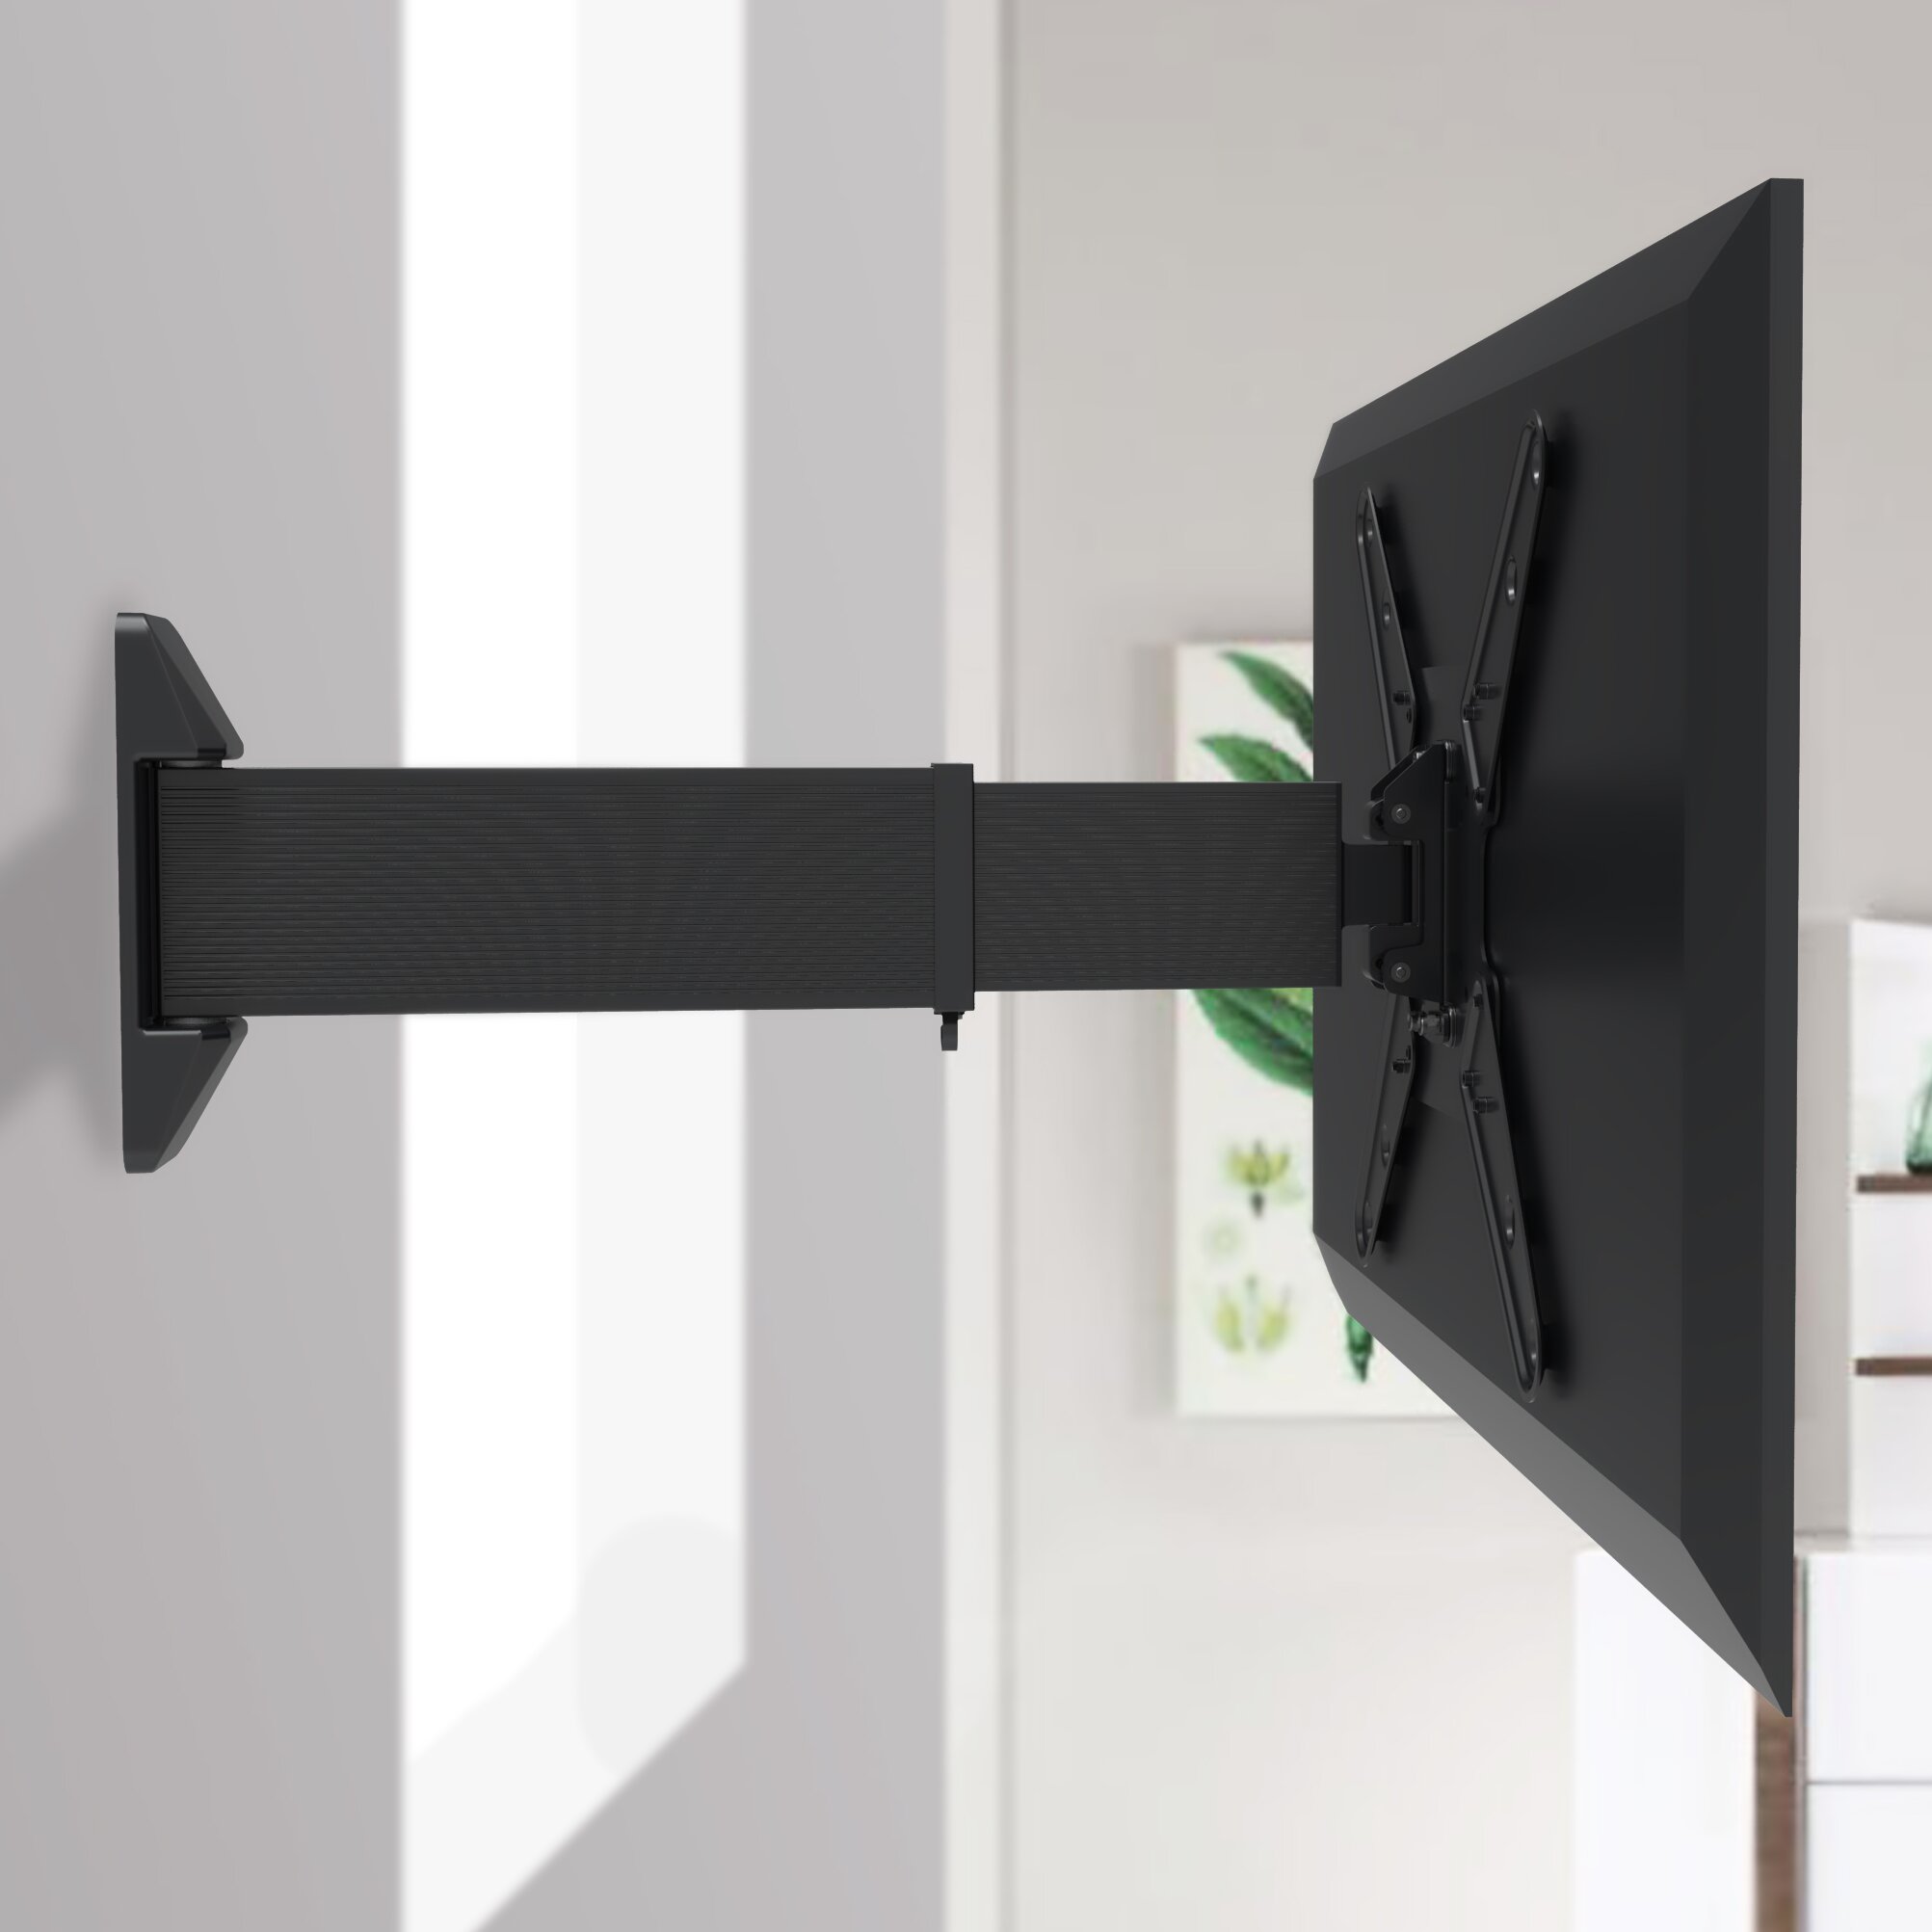 full motion tv wall mount reviews